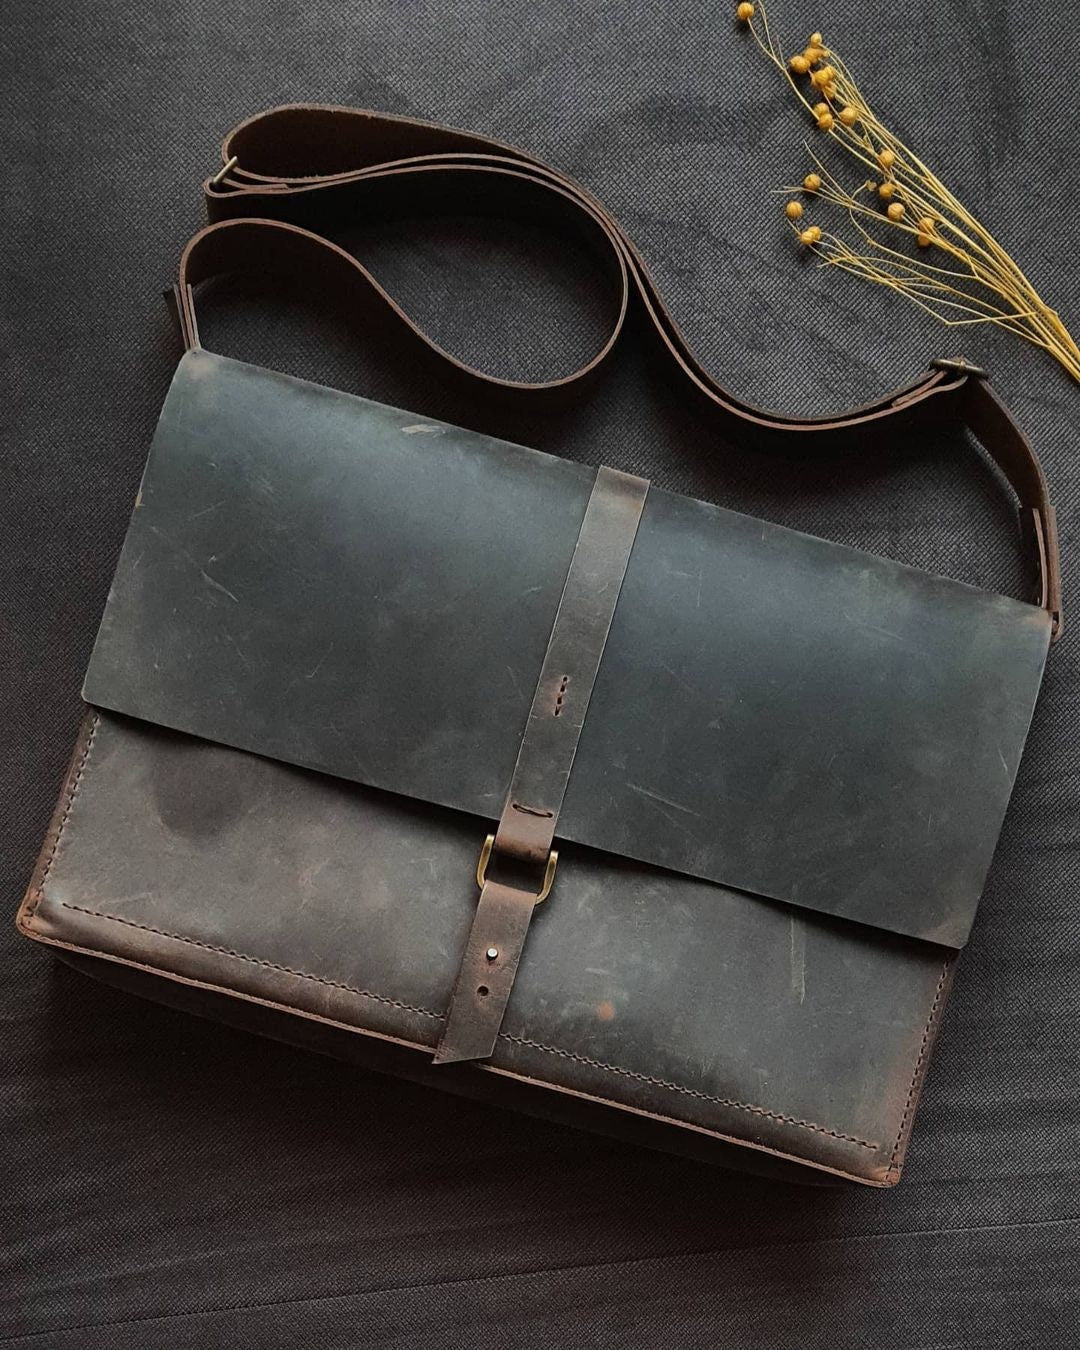 Limited Elegant Handmade Leather Purse Crossbody Suitable For Laptop  | Leather Bag | Leather Purse Crossbody  | For Special Discont PM Me  99percenthandmade Olive Drab  